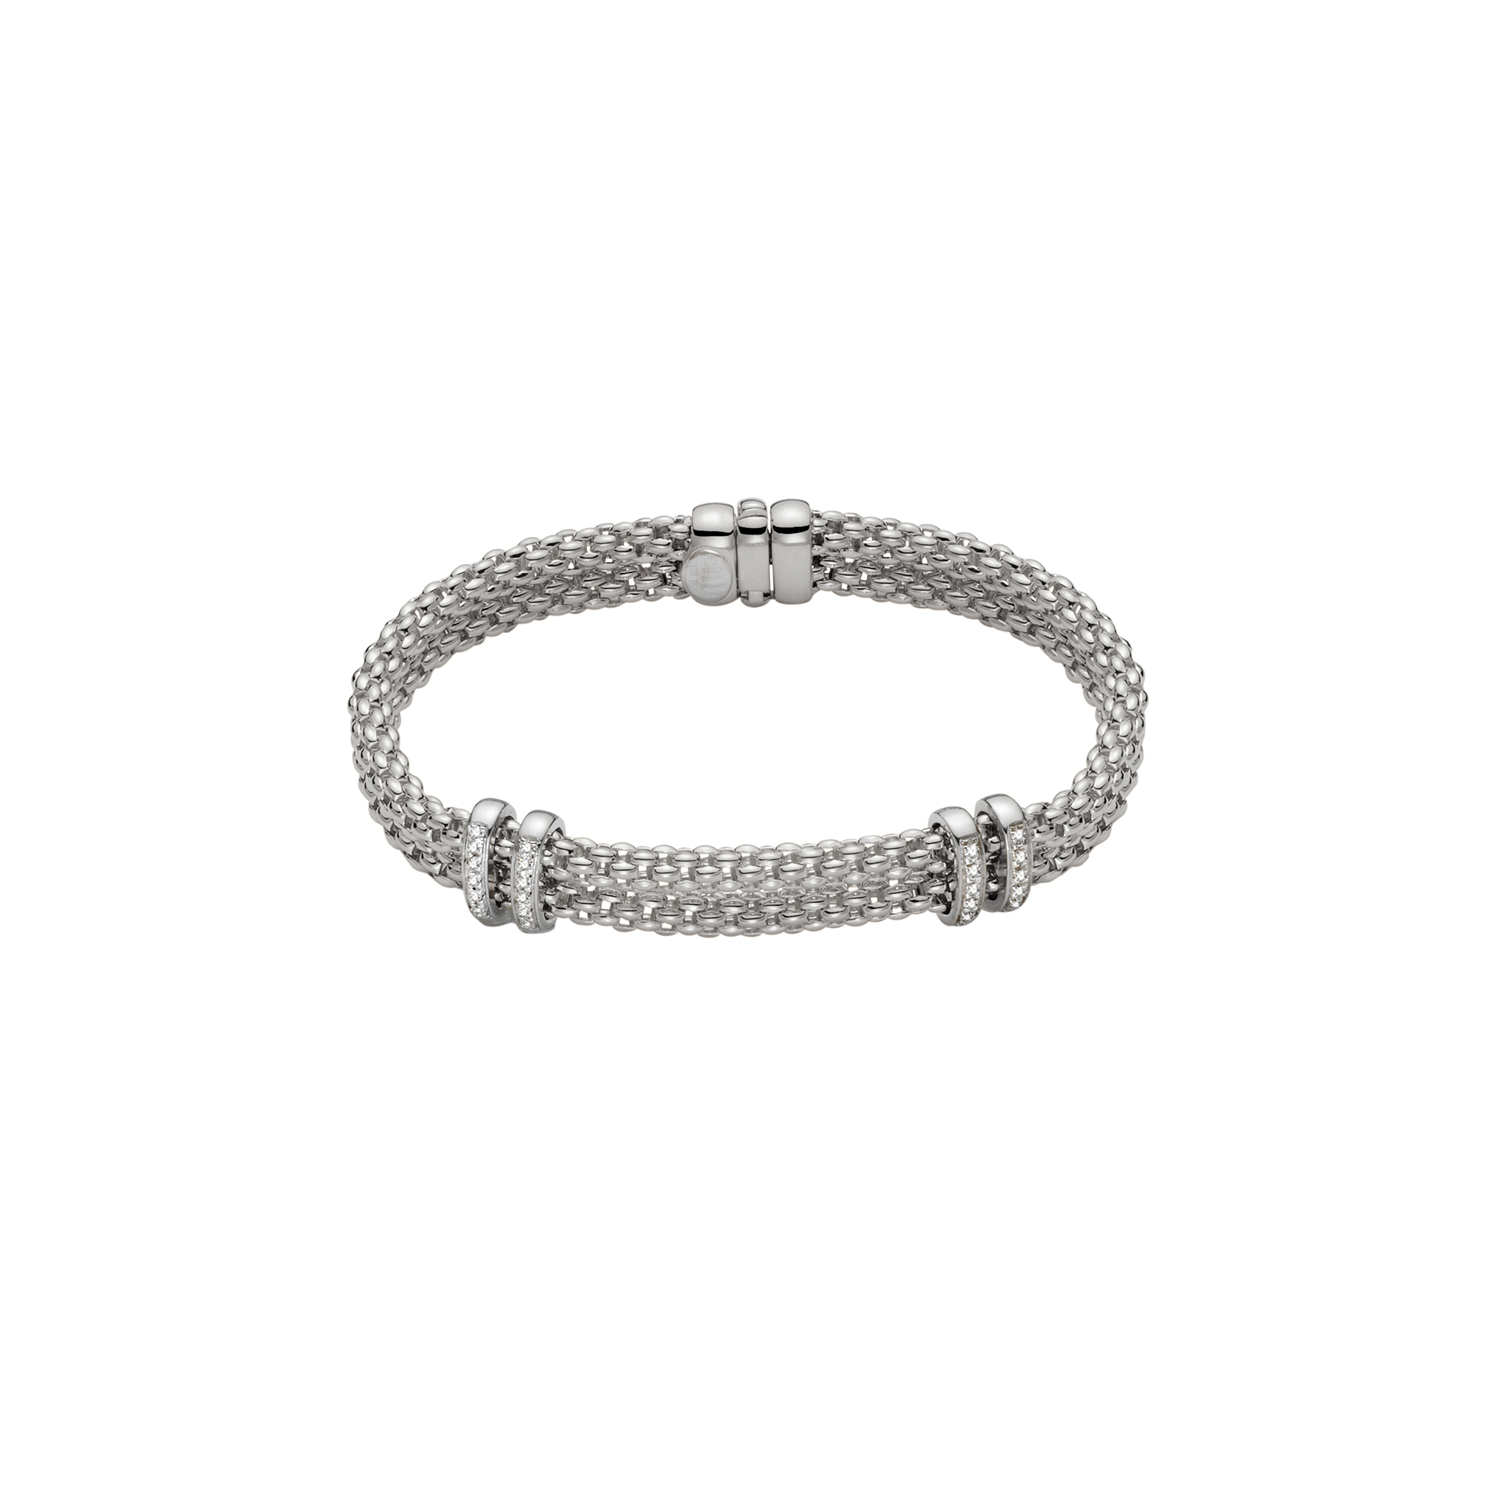 Fope Solo Maori Collection Bracelet in White Gold with Diamonds